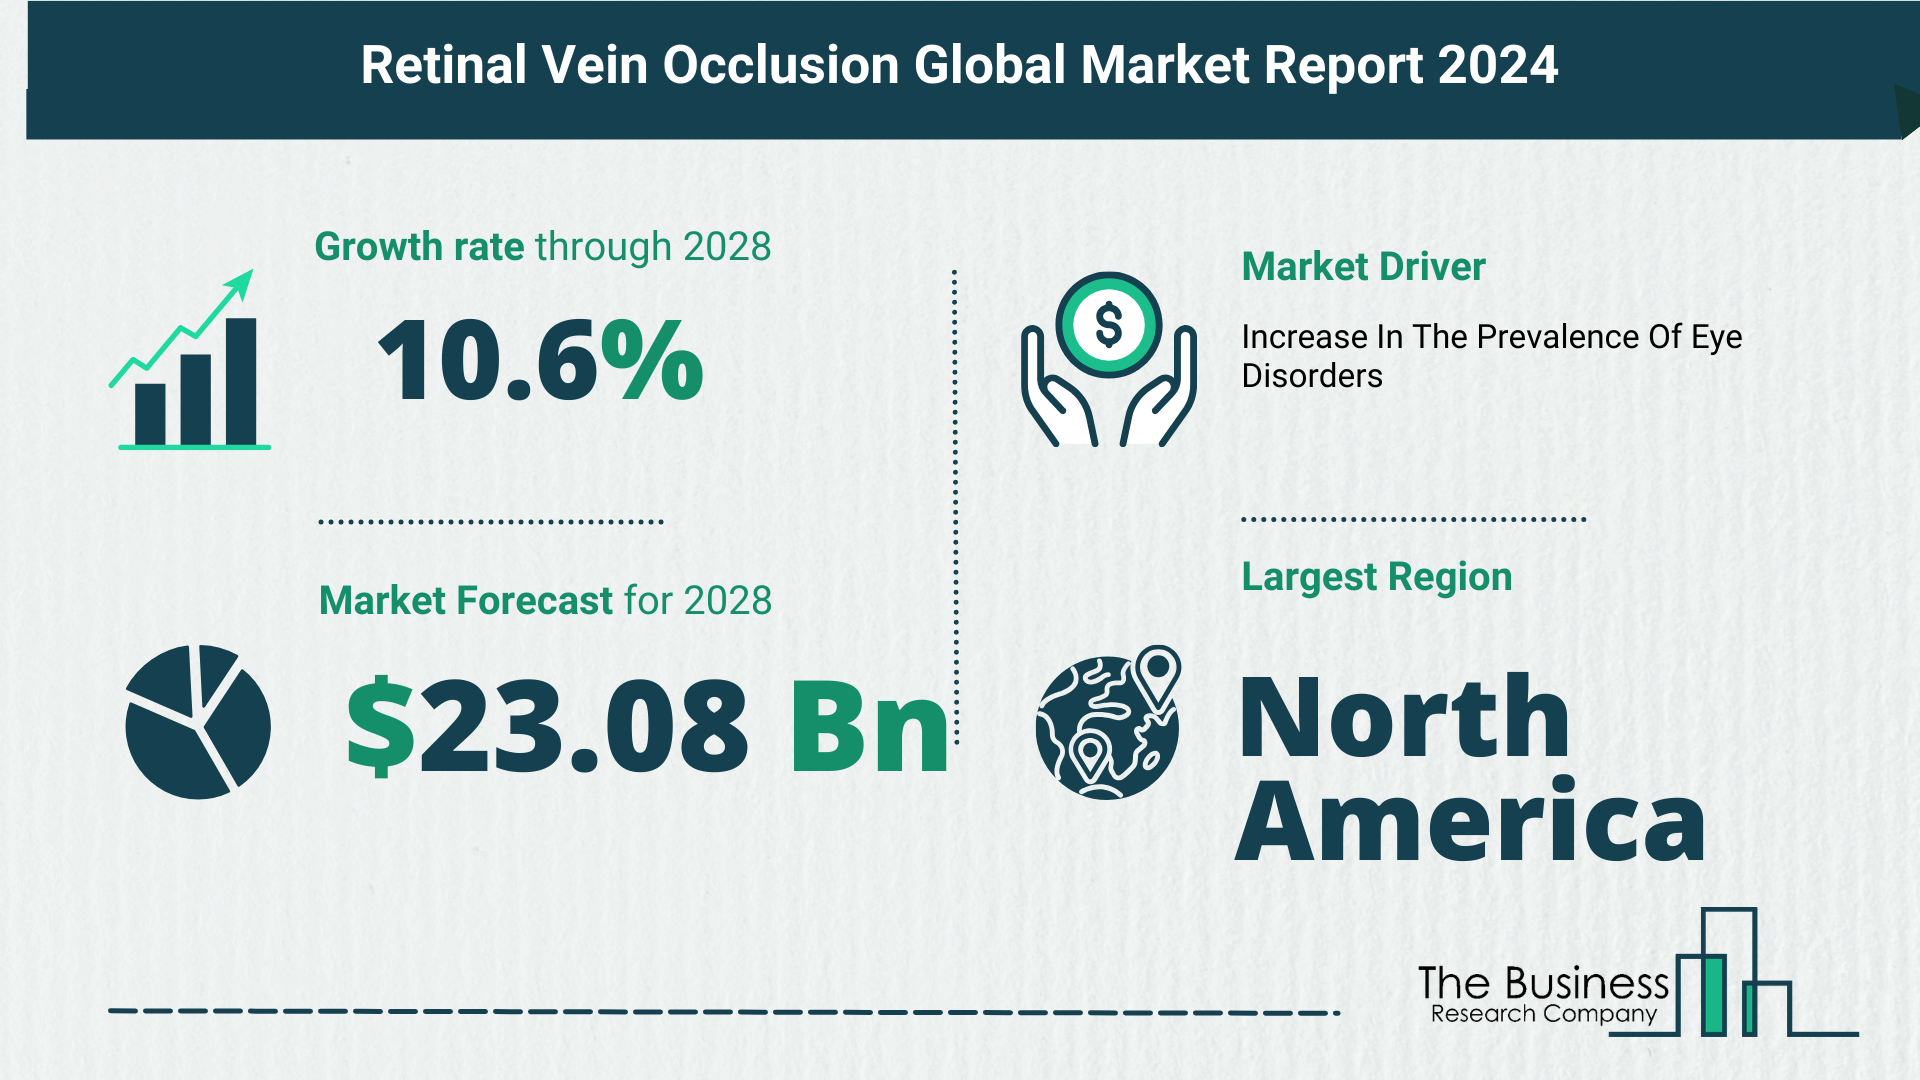 Comprehensive Analysis On Size, Share, And Drivers Of The Retinal Vein Occlusion Market